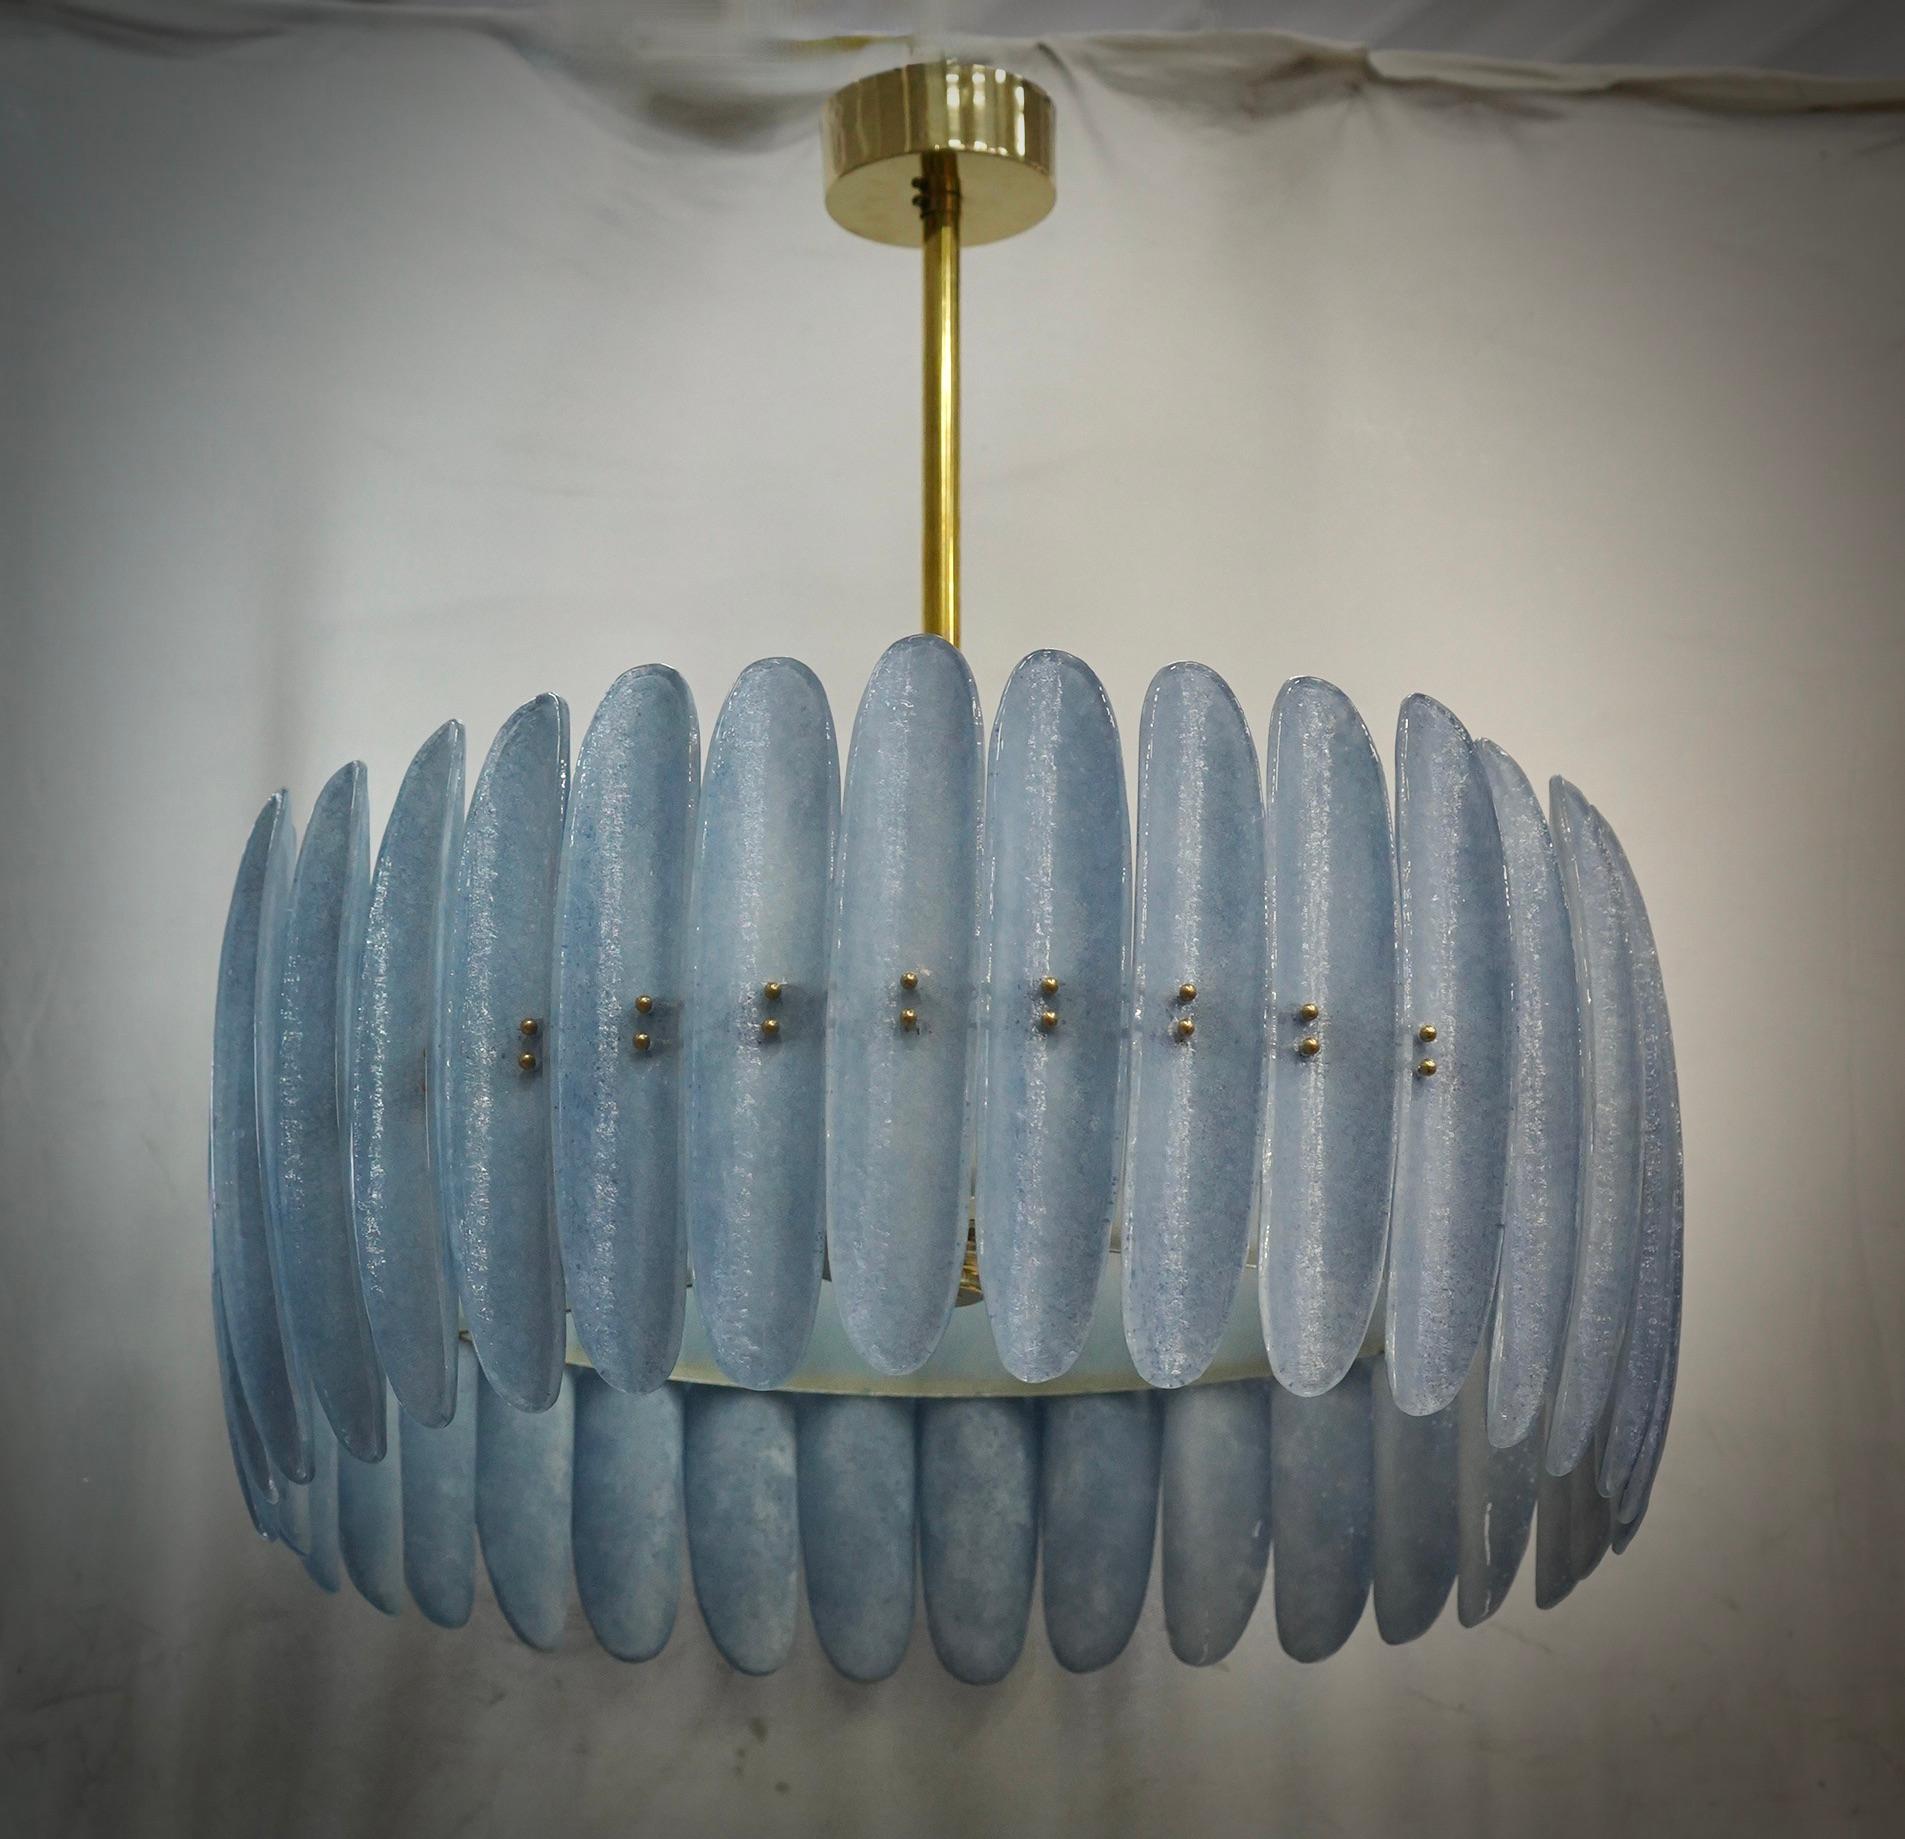 Fantastic round chandelier in Murano glass and polished brass. Note the shape of the blue Murano glass half shells, very beautiful and particular. Simple but very elegant linear Murano chandelier.

Murano chandelier in artistic glass and brass.